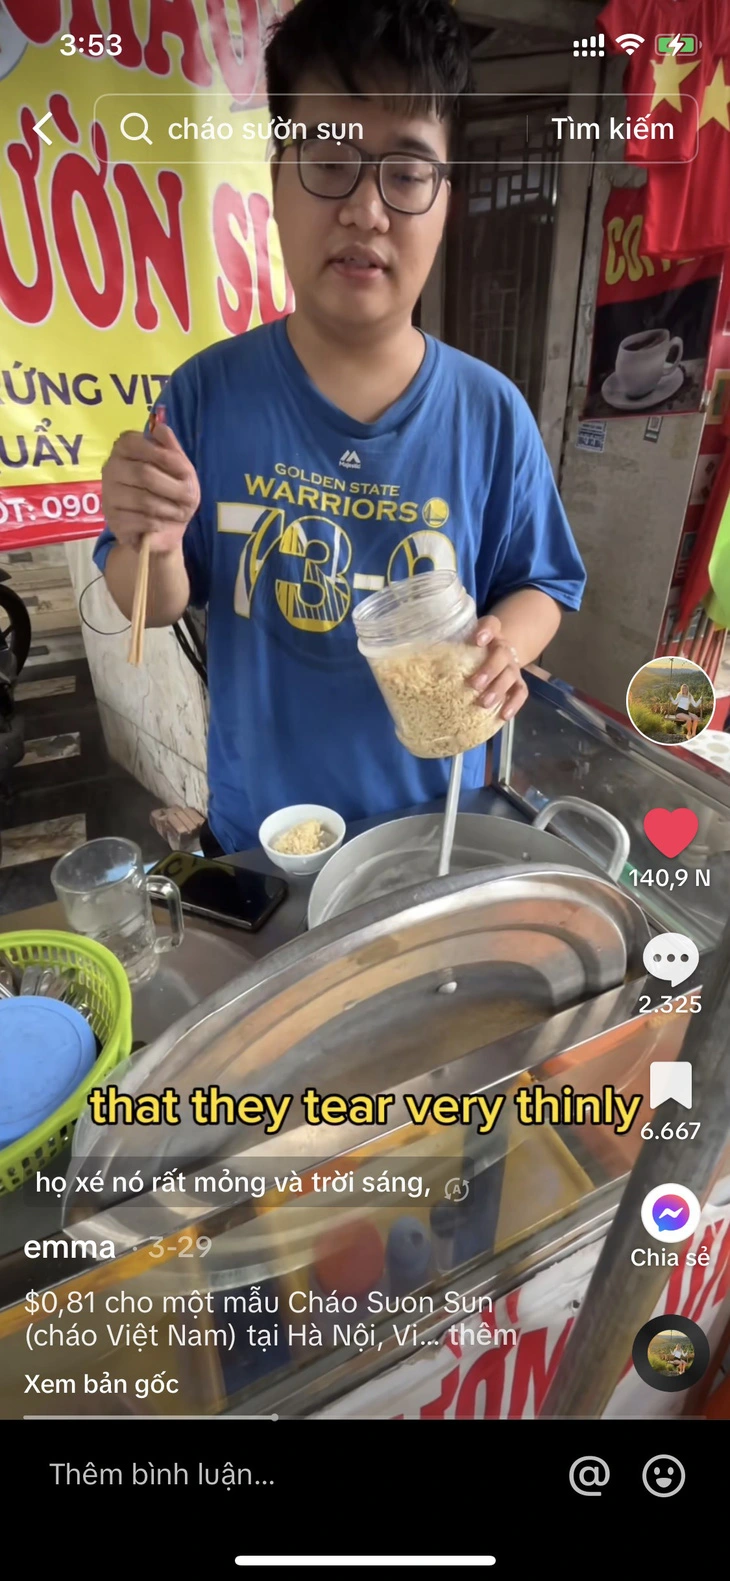 A screenshot from a vlog of Emma Ann Odom, the owner of TikTok channel ‘@emmaa_eatss,’ shows Le Quang Tung, who sells rib congee in Hanoi, Vietnam.